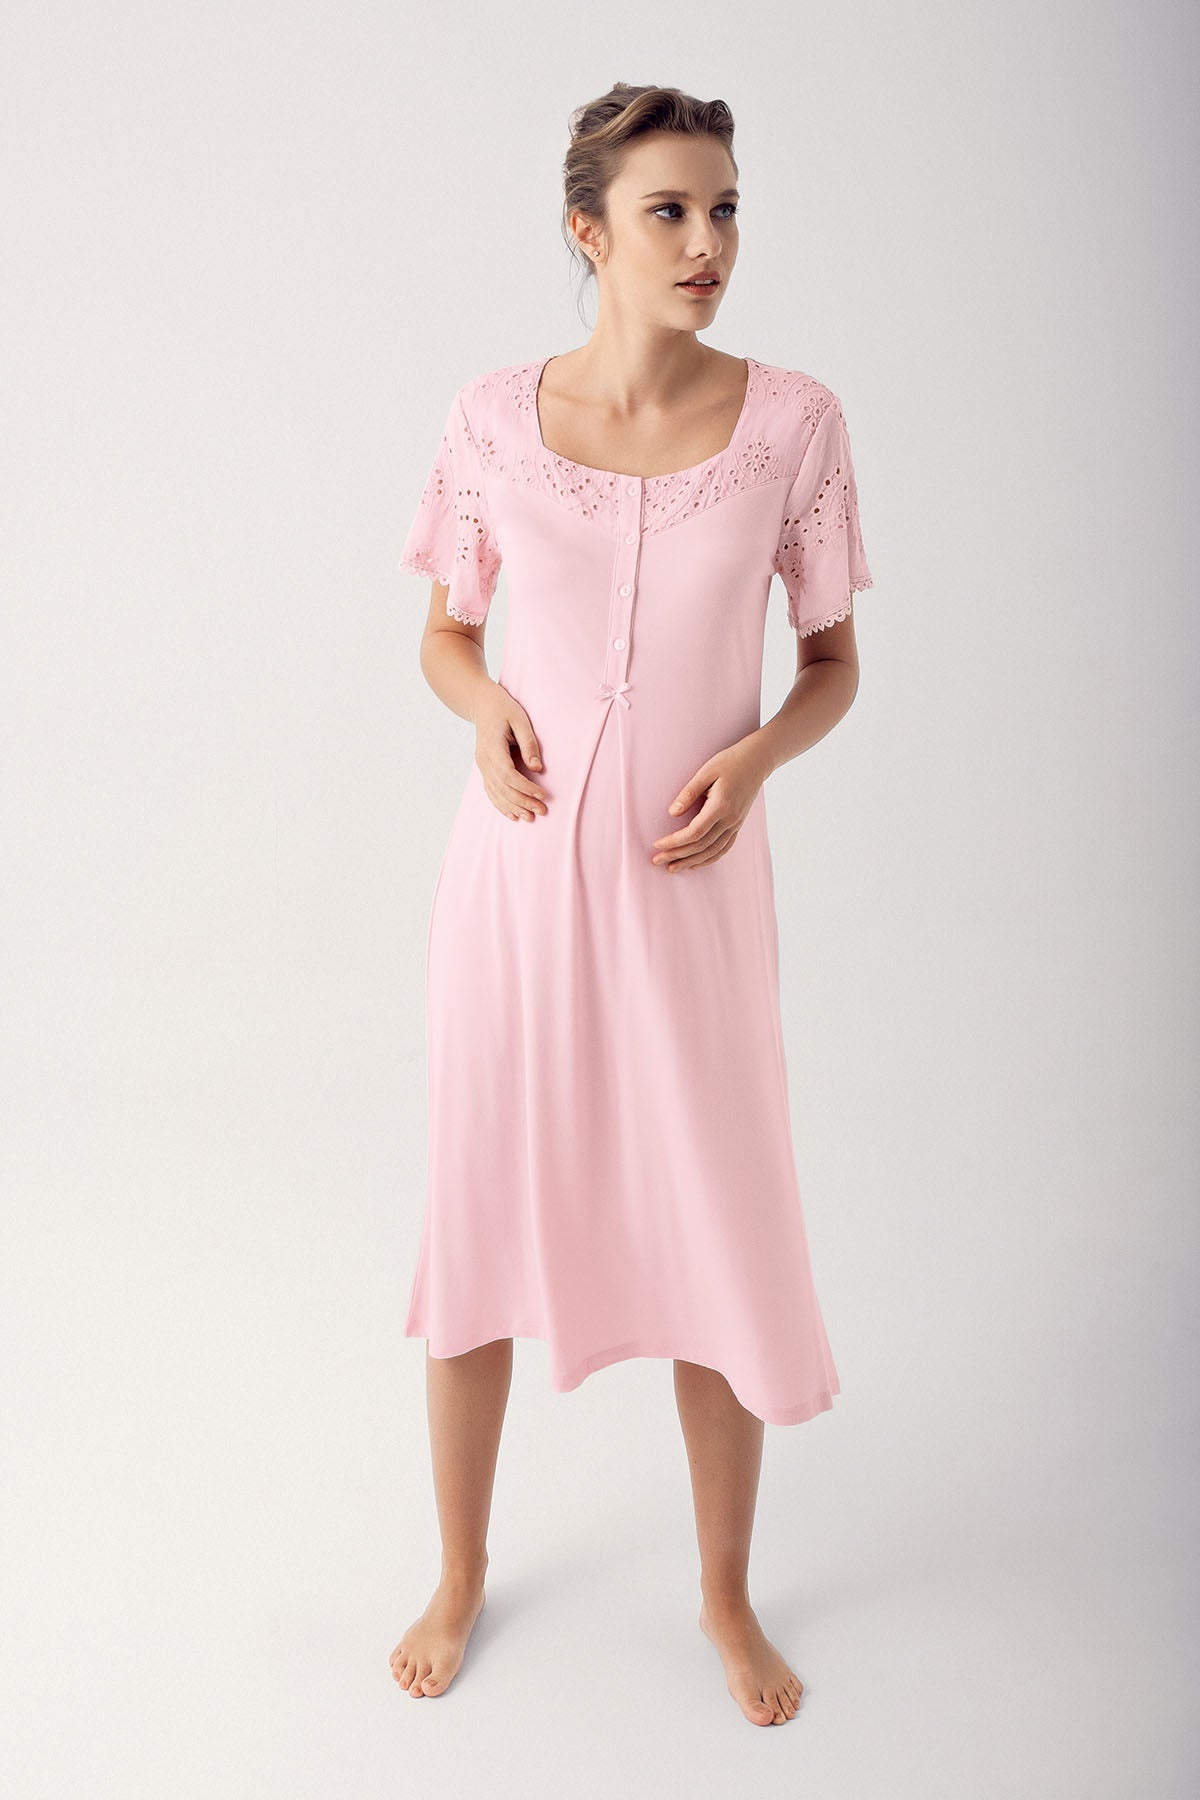 Shopymommy 14400 Motif Embroidered Maternity & Nursing Nightgown With Robe Powder